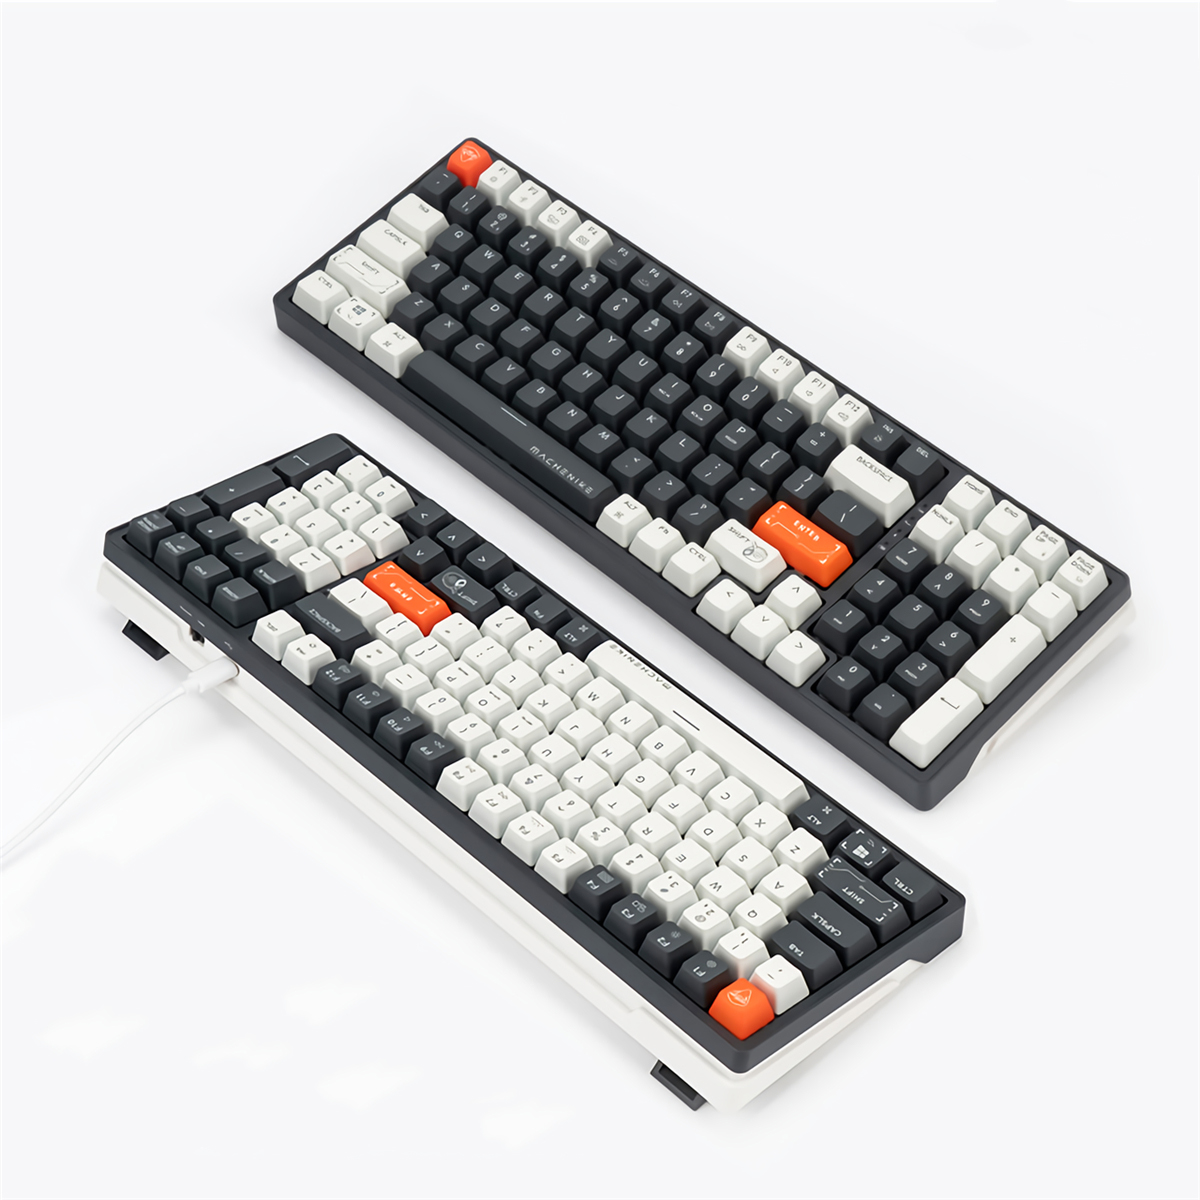 Find MACHENIKE K600 Mechanical Gaming Keyboard Dual Mode Type C Wired bluetooth5 0 100 Keys Translucent ABS Keycaps Kailh Blue/Brown/Red Switch White LED Backlit Ergonomic Keyboard for Sale on Gipsybee.com with cryptocurrencies